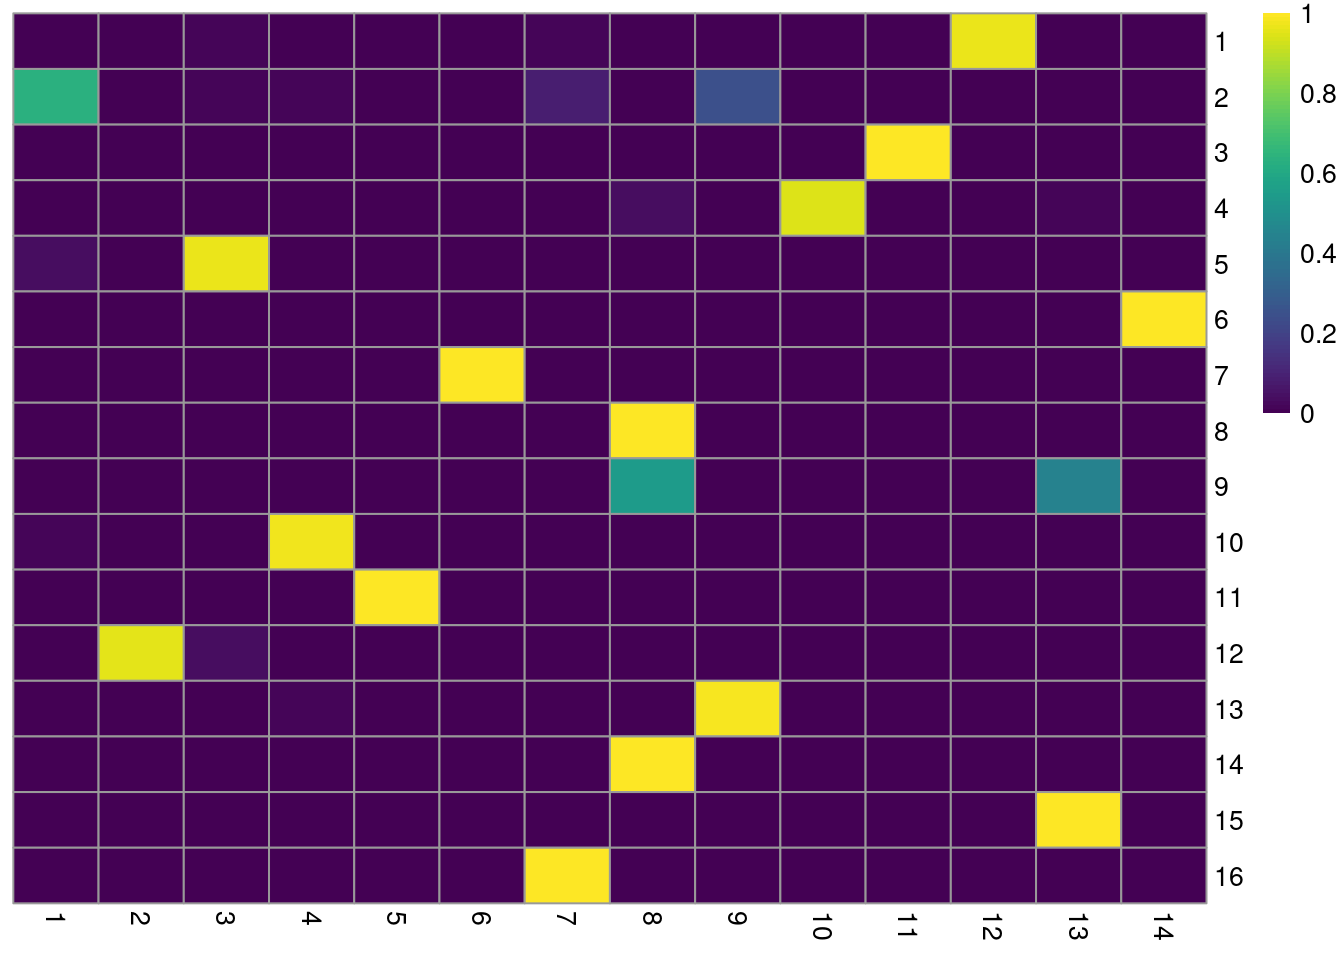 Heatmap of the proportions of cells from each Walktrap cluster (rows) across the Louvain clusters (columns) in the PBMC dataset. Each row represents the distribution of cells across Louvain clusters for a given Walktrap cluster.